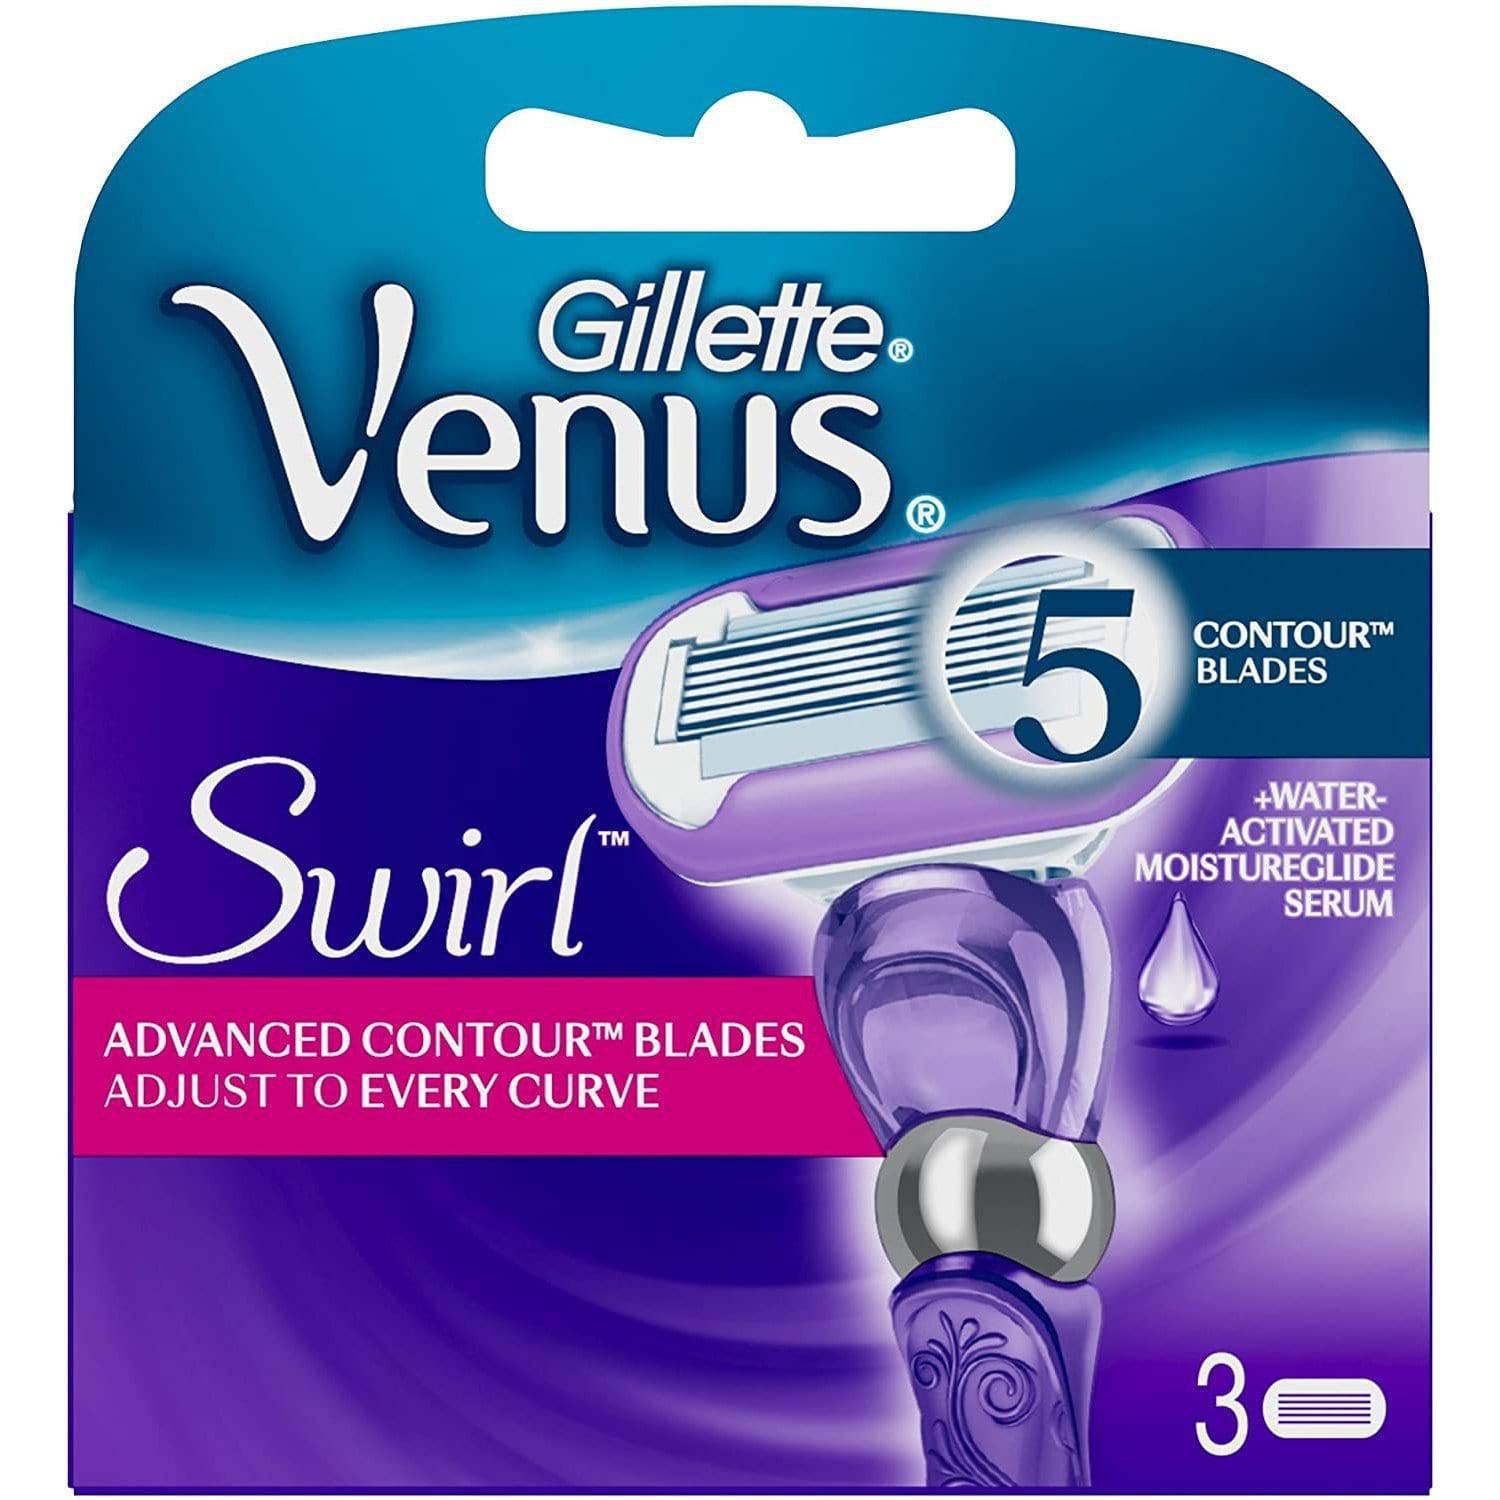 Gillette Venus Swirl Blades 3 Pack - with Water-activated moisture glide - Healthxpress.ie